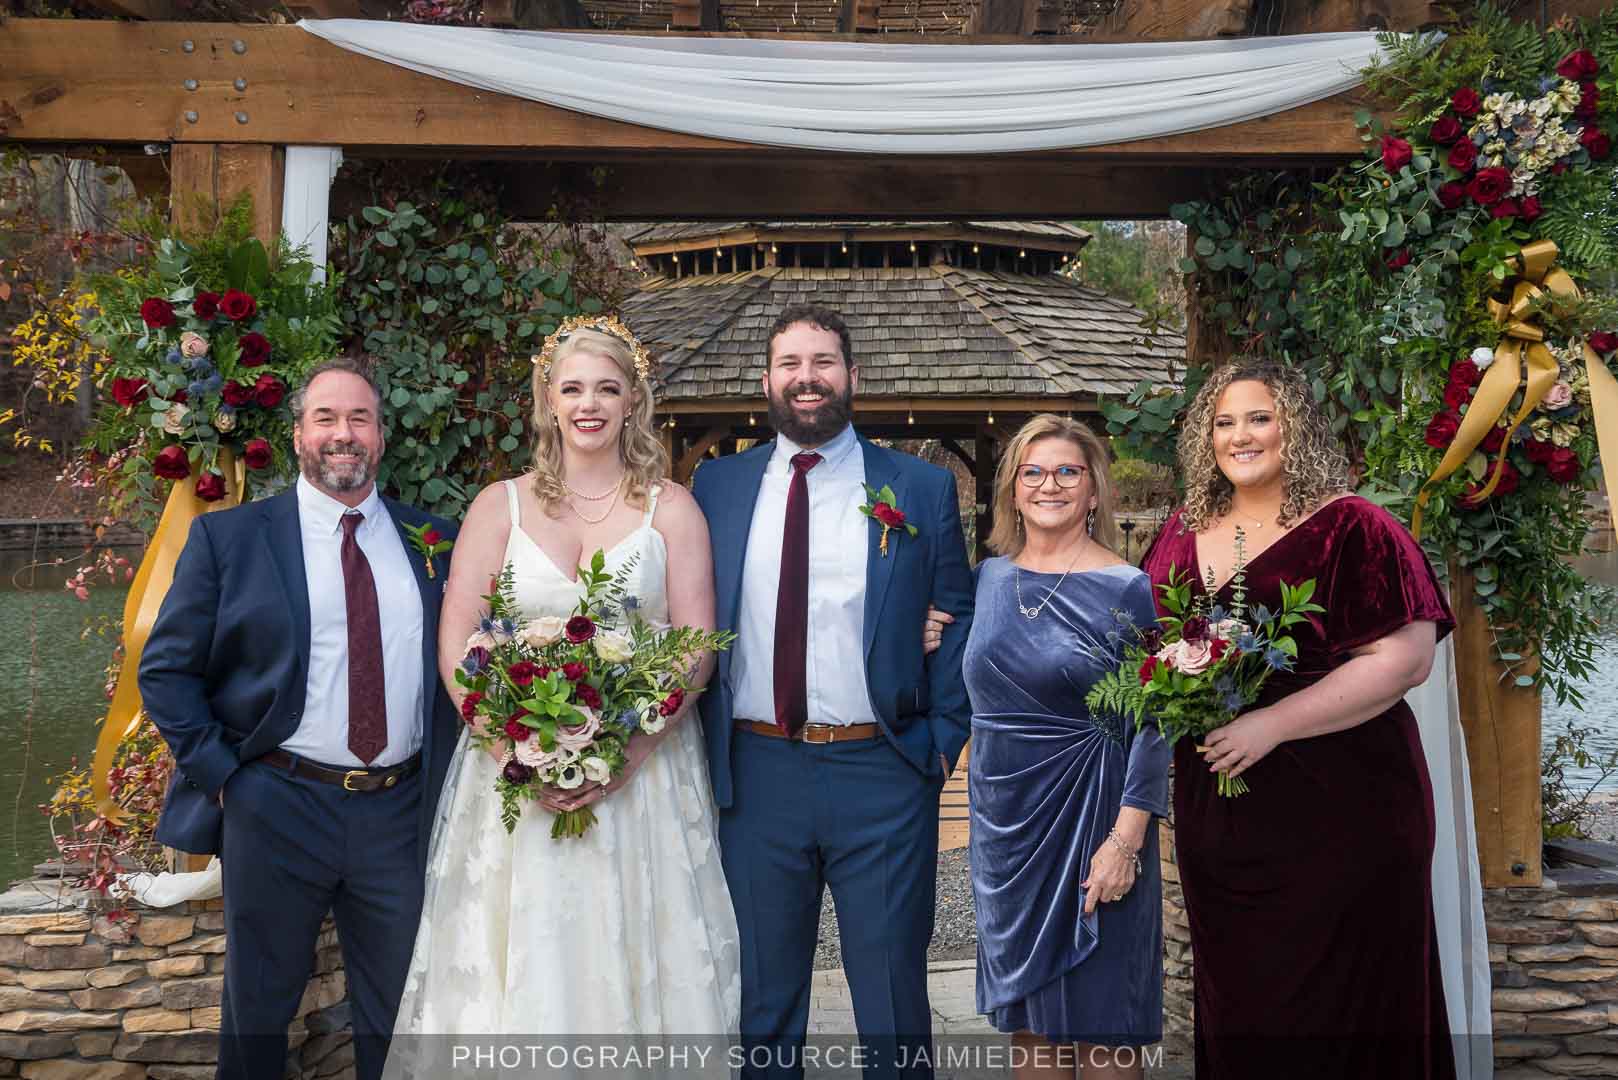 Rocky's Lake Estate Wedding Venue - family portraits with groom's family